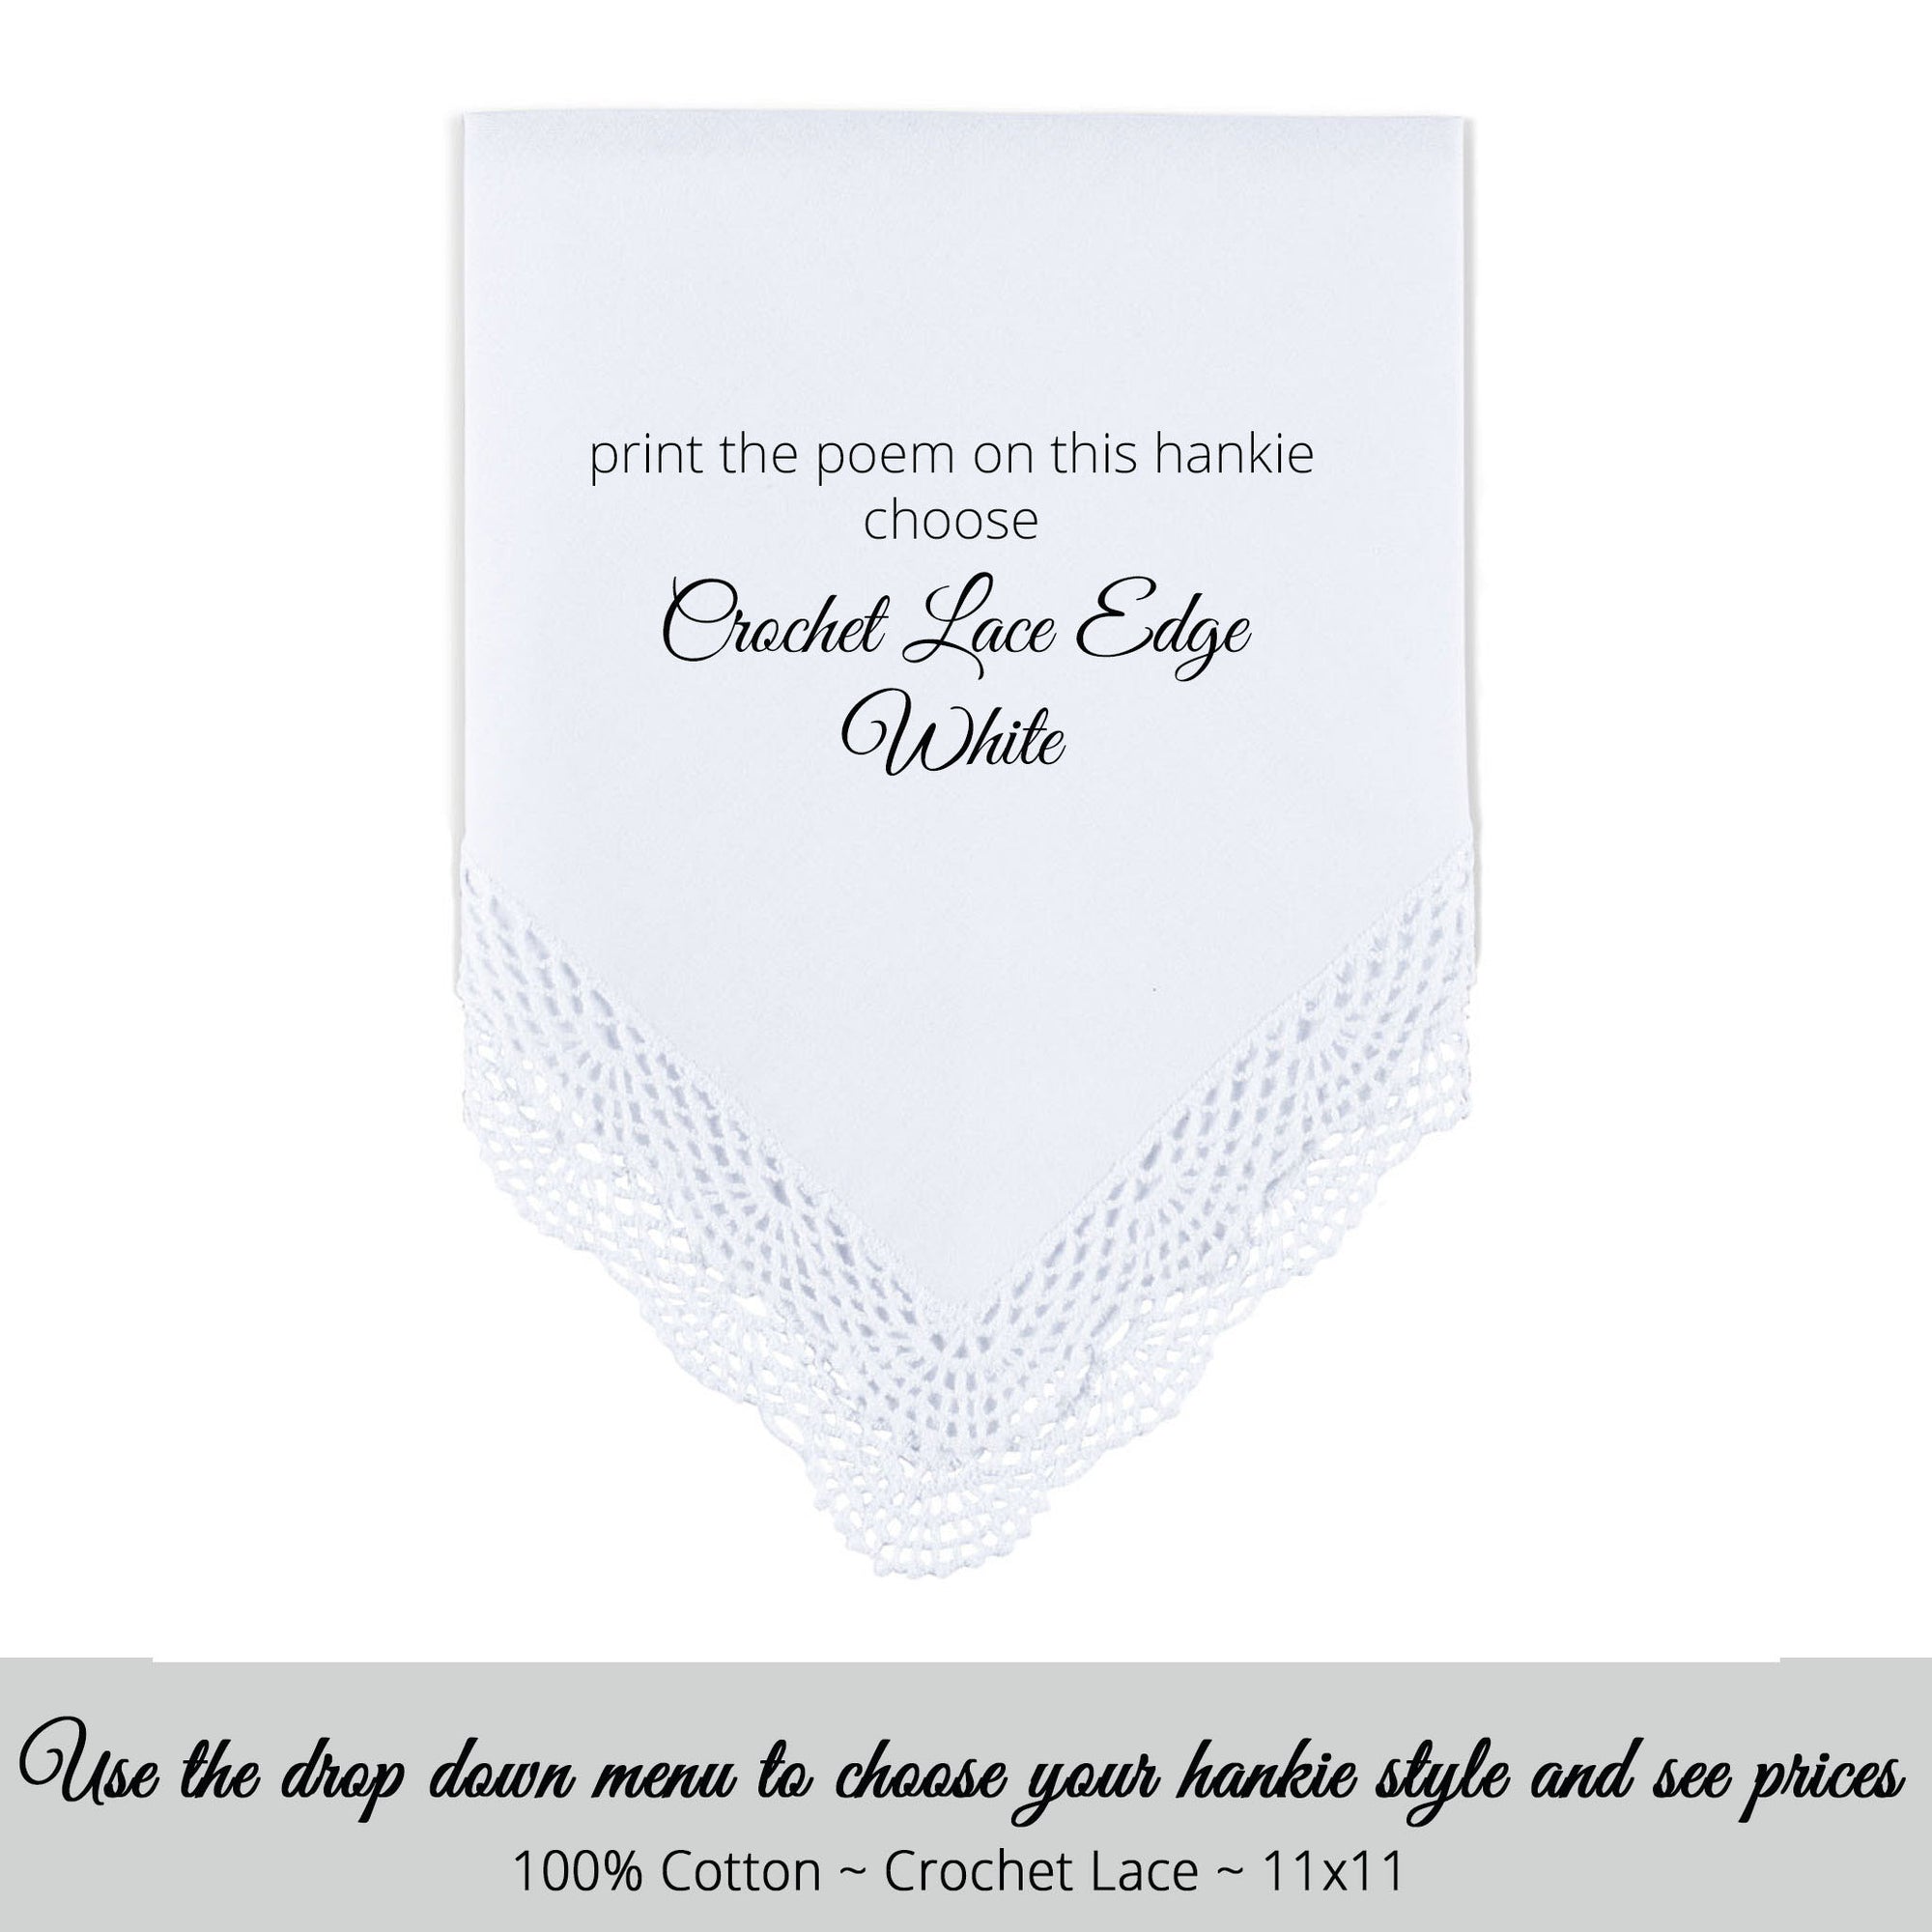 Wedding handkerchief white with crochet lace edge for the flower girl